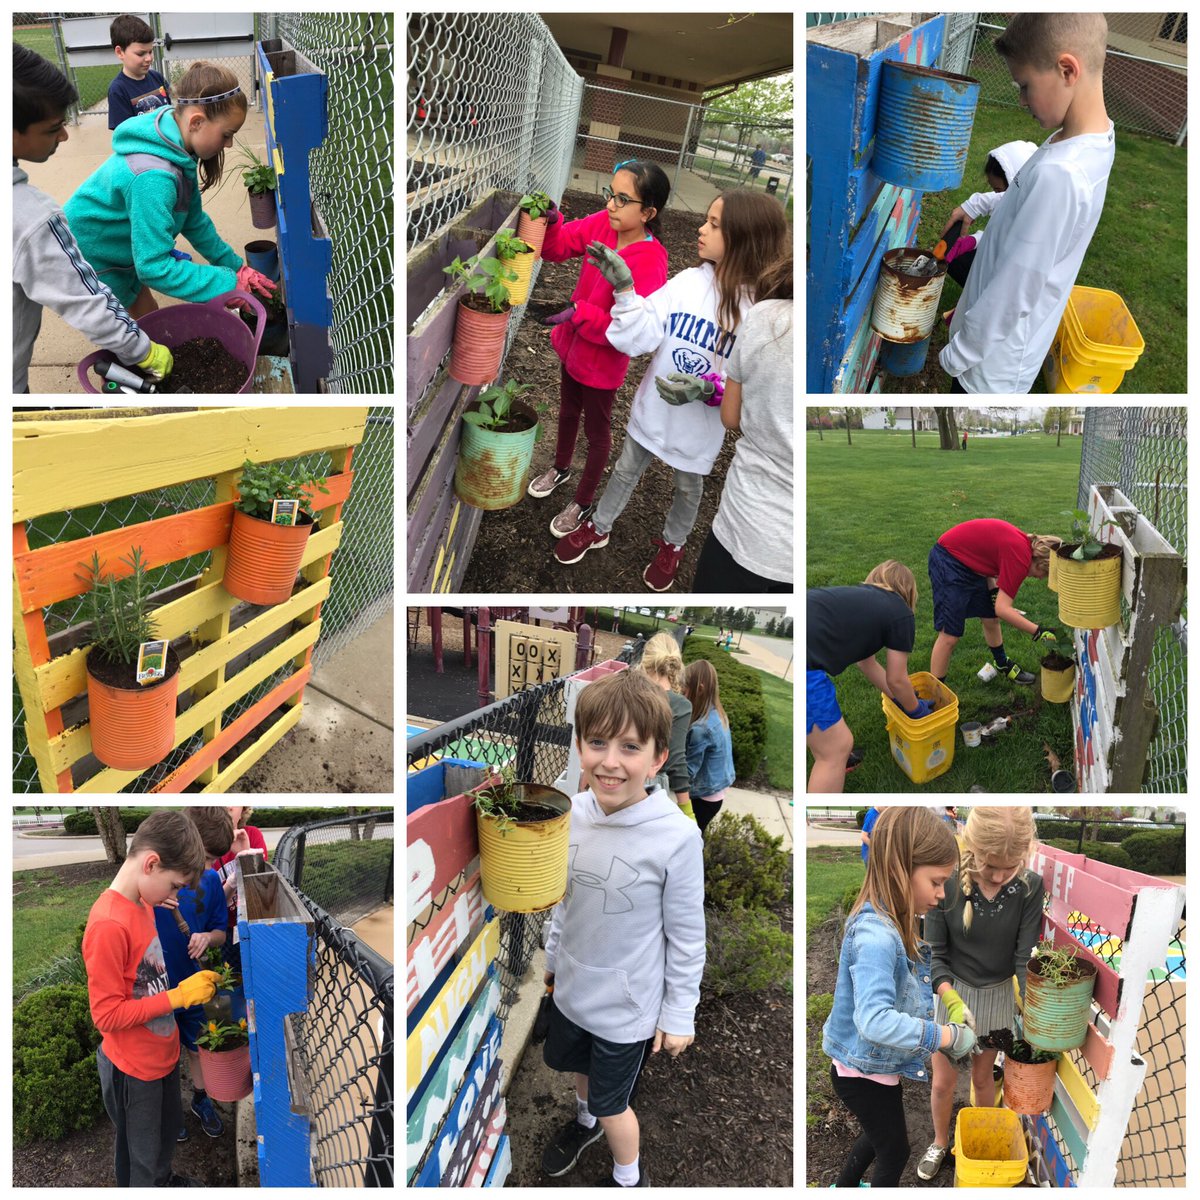 Planting in our pallet gardens today. Herbs, flowers, and veggies. #TCEcardinals #projectwork #GlobalGoals